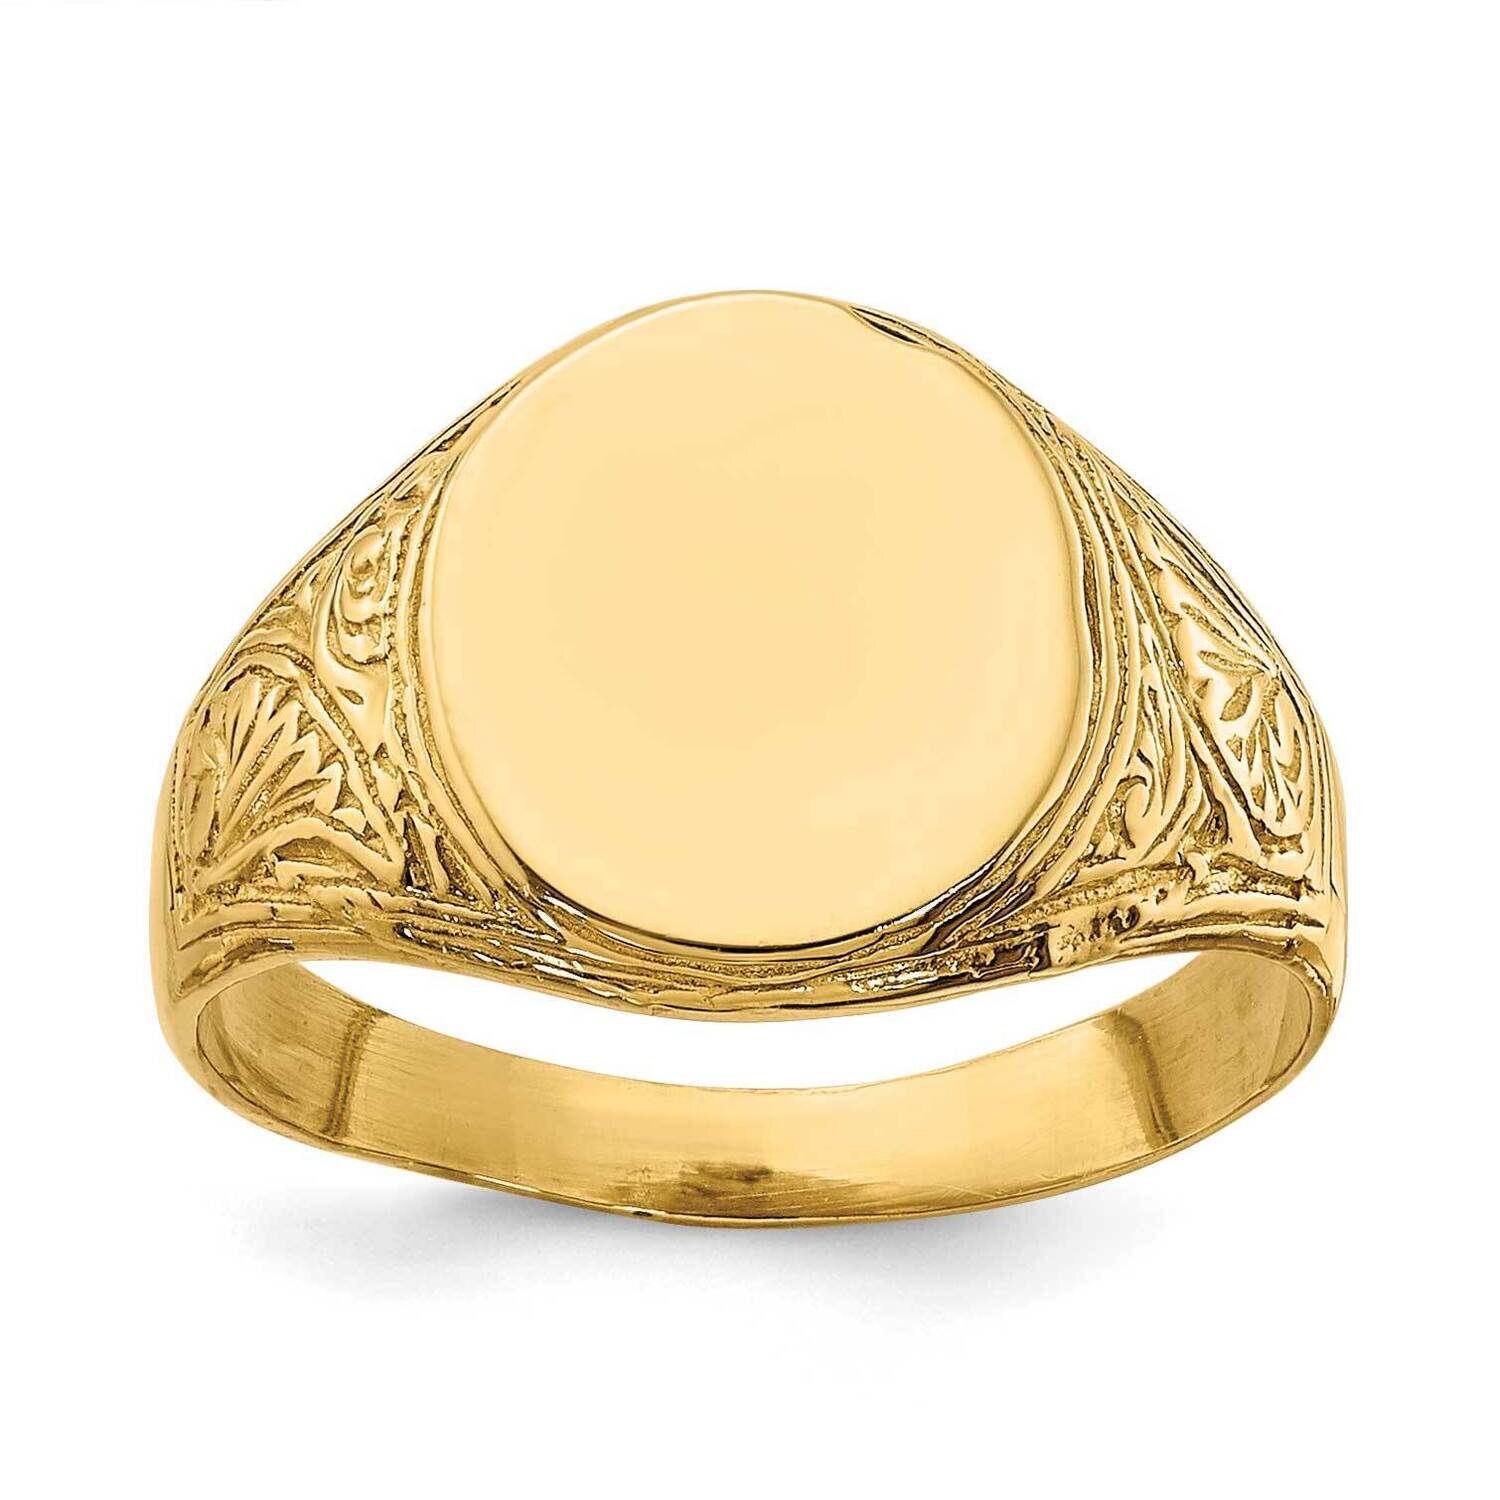 Oval Signet Baby Ring 14k Gold R695